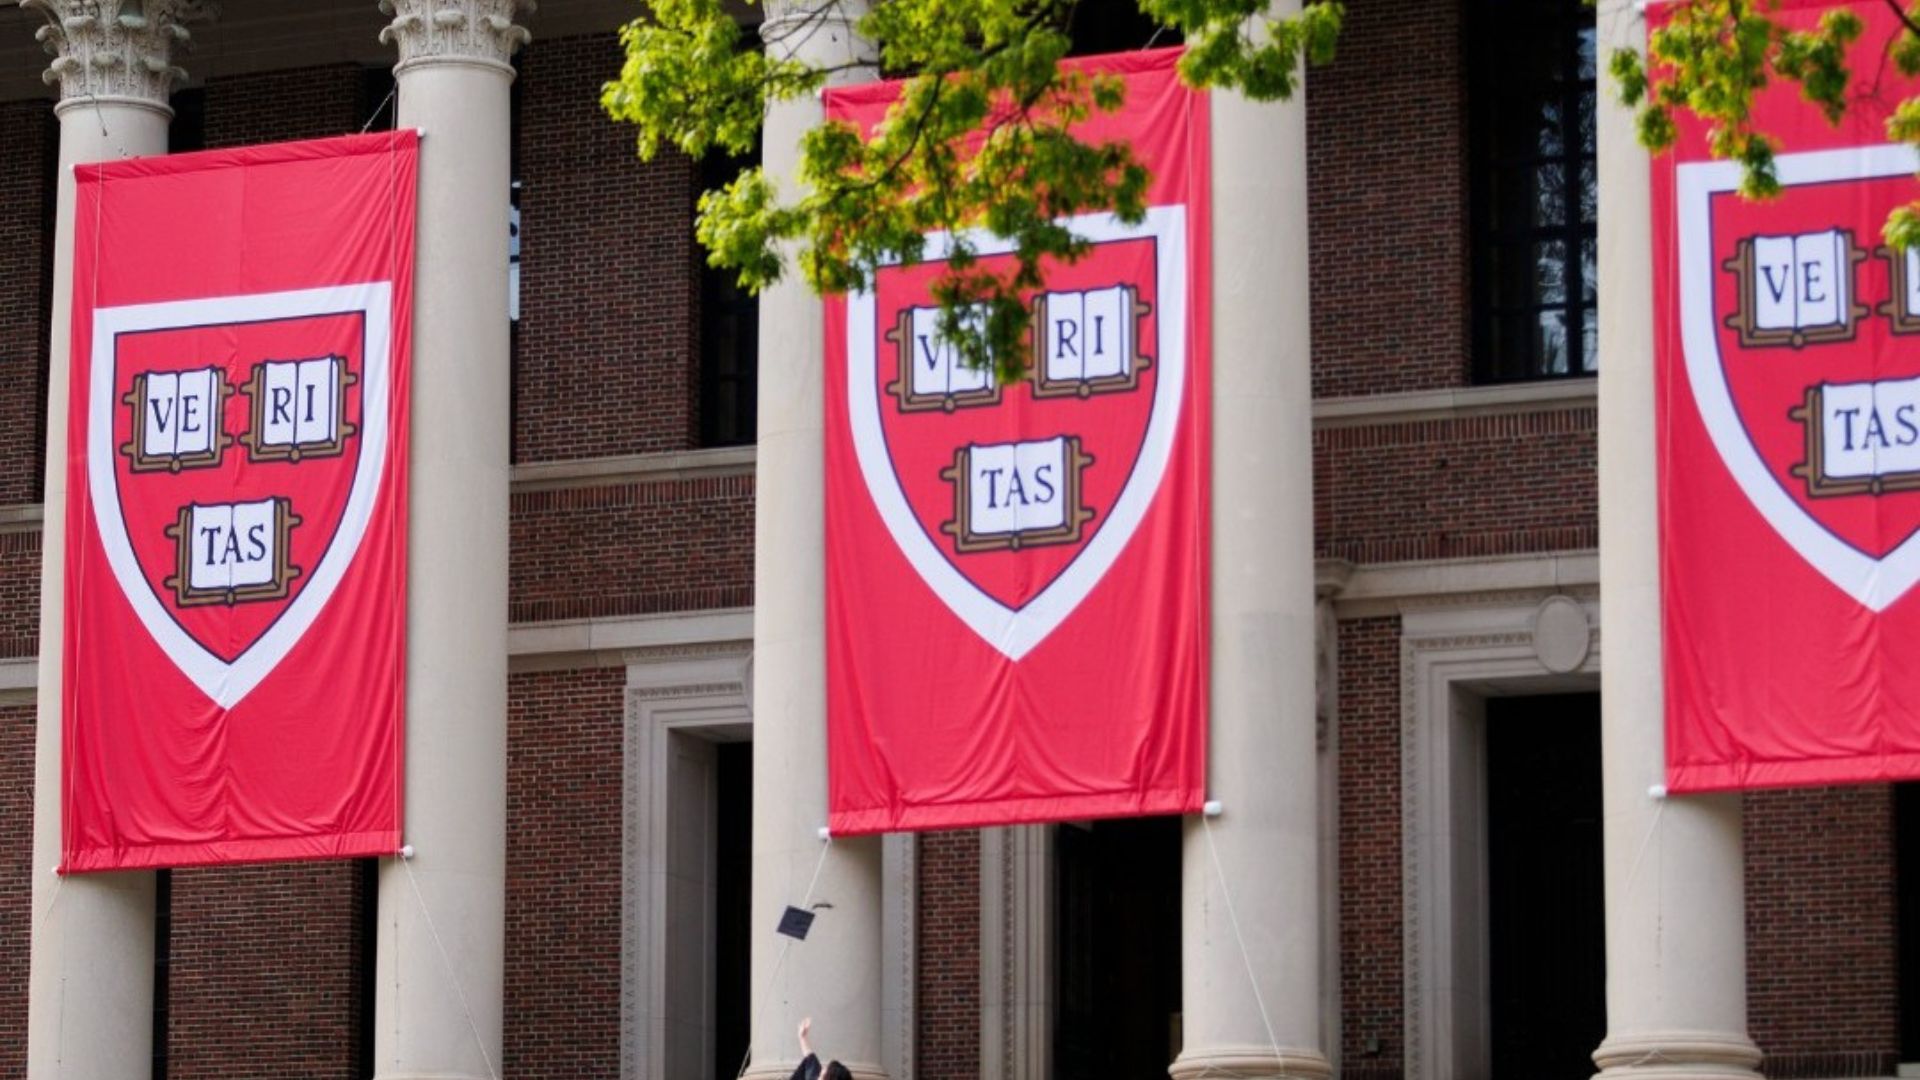 <p>During the Harvard College commencement ceremony, a <a href="https://apnews.com/article/harvard-commencement-israel-palestinians-campus-protests-cc75b954538ab2cffa4425e55a26bbdb">walkout</a> occurred just before 11 a.m. on Thursday.  </p> <p>Participants in the walkout were heard chanting "Let them walk" among other slogans, during an approximately 10-minute demonstration, which was documented in videos from the event.     </p>